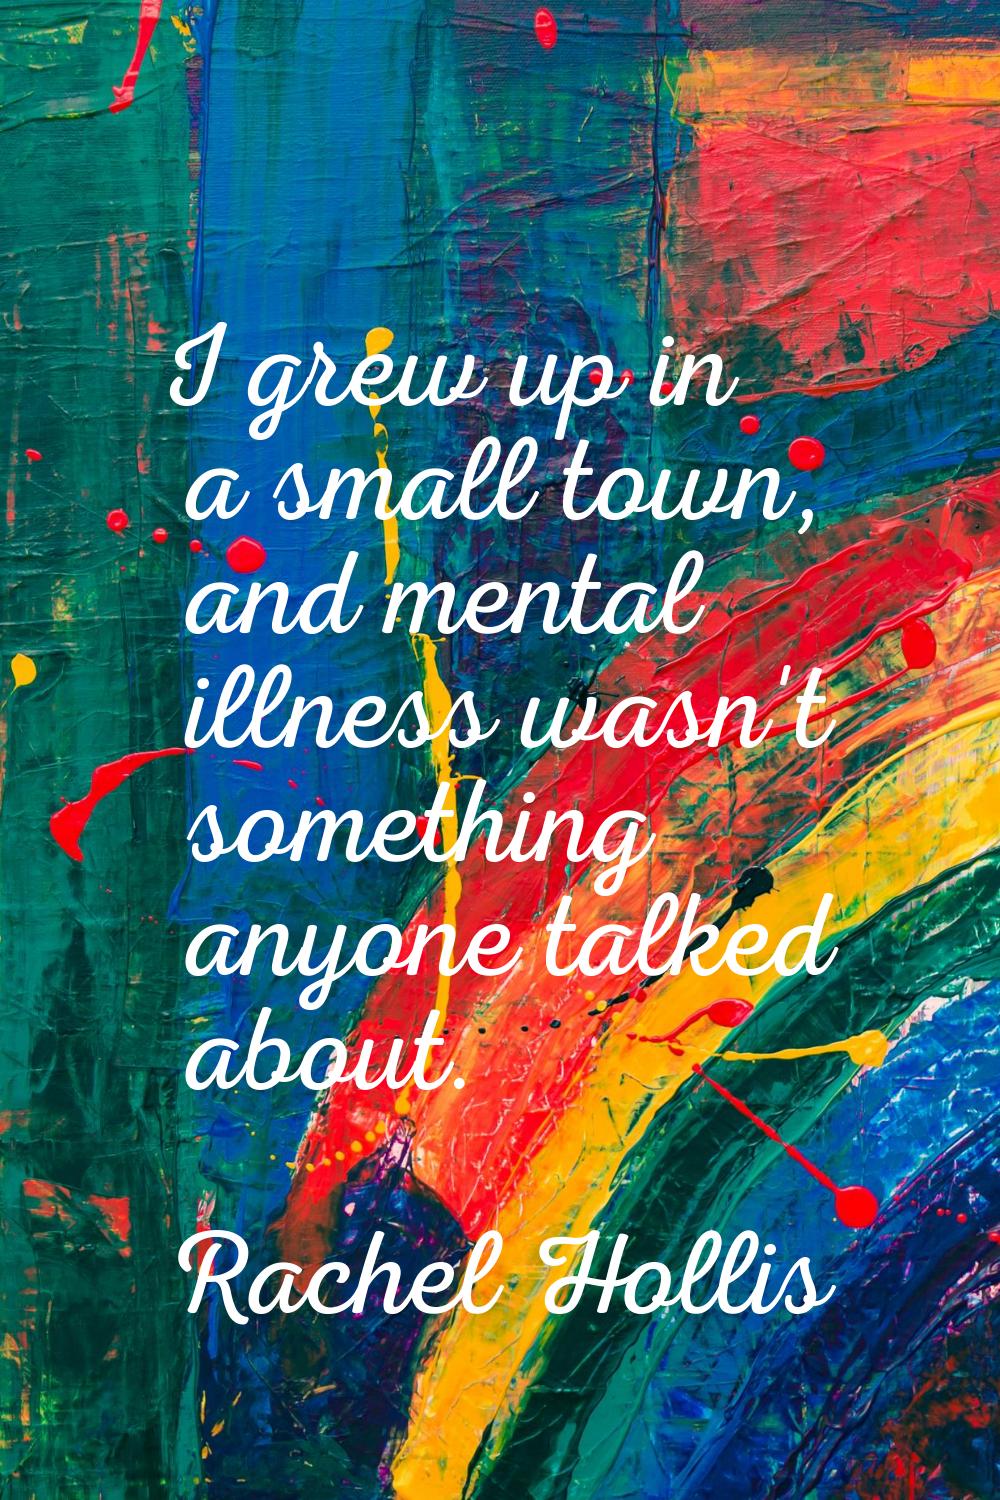 I grew up in a small town, and mental illness wasn't something anyone talked about.